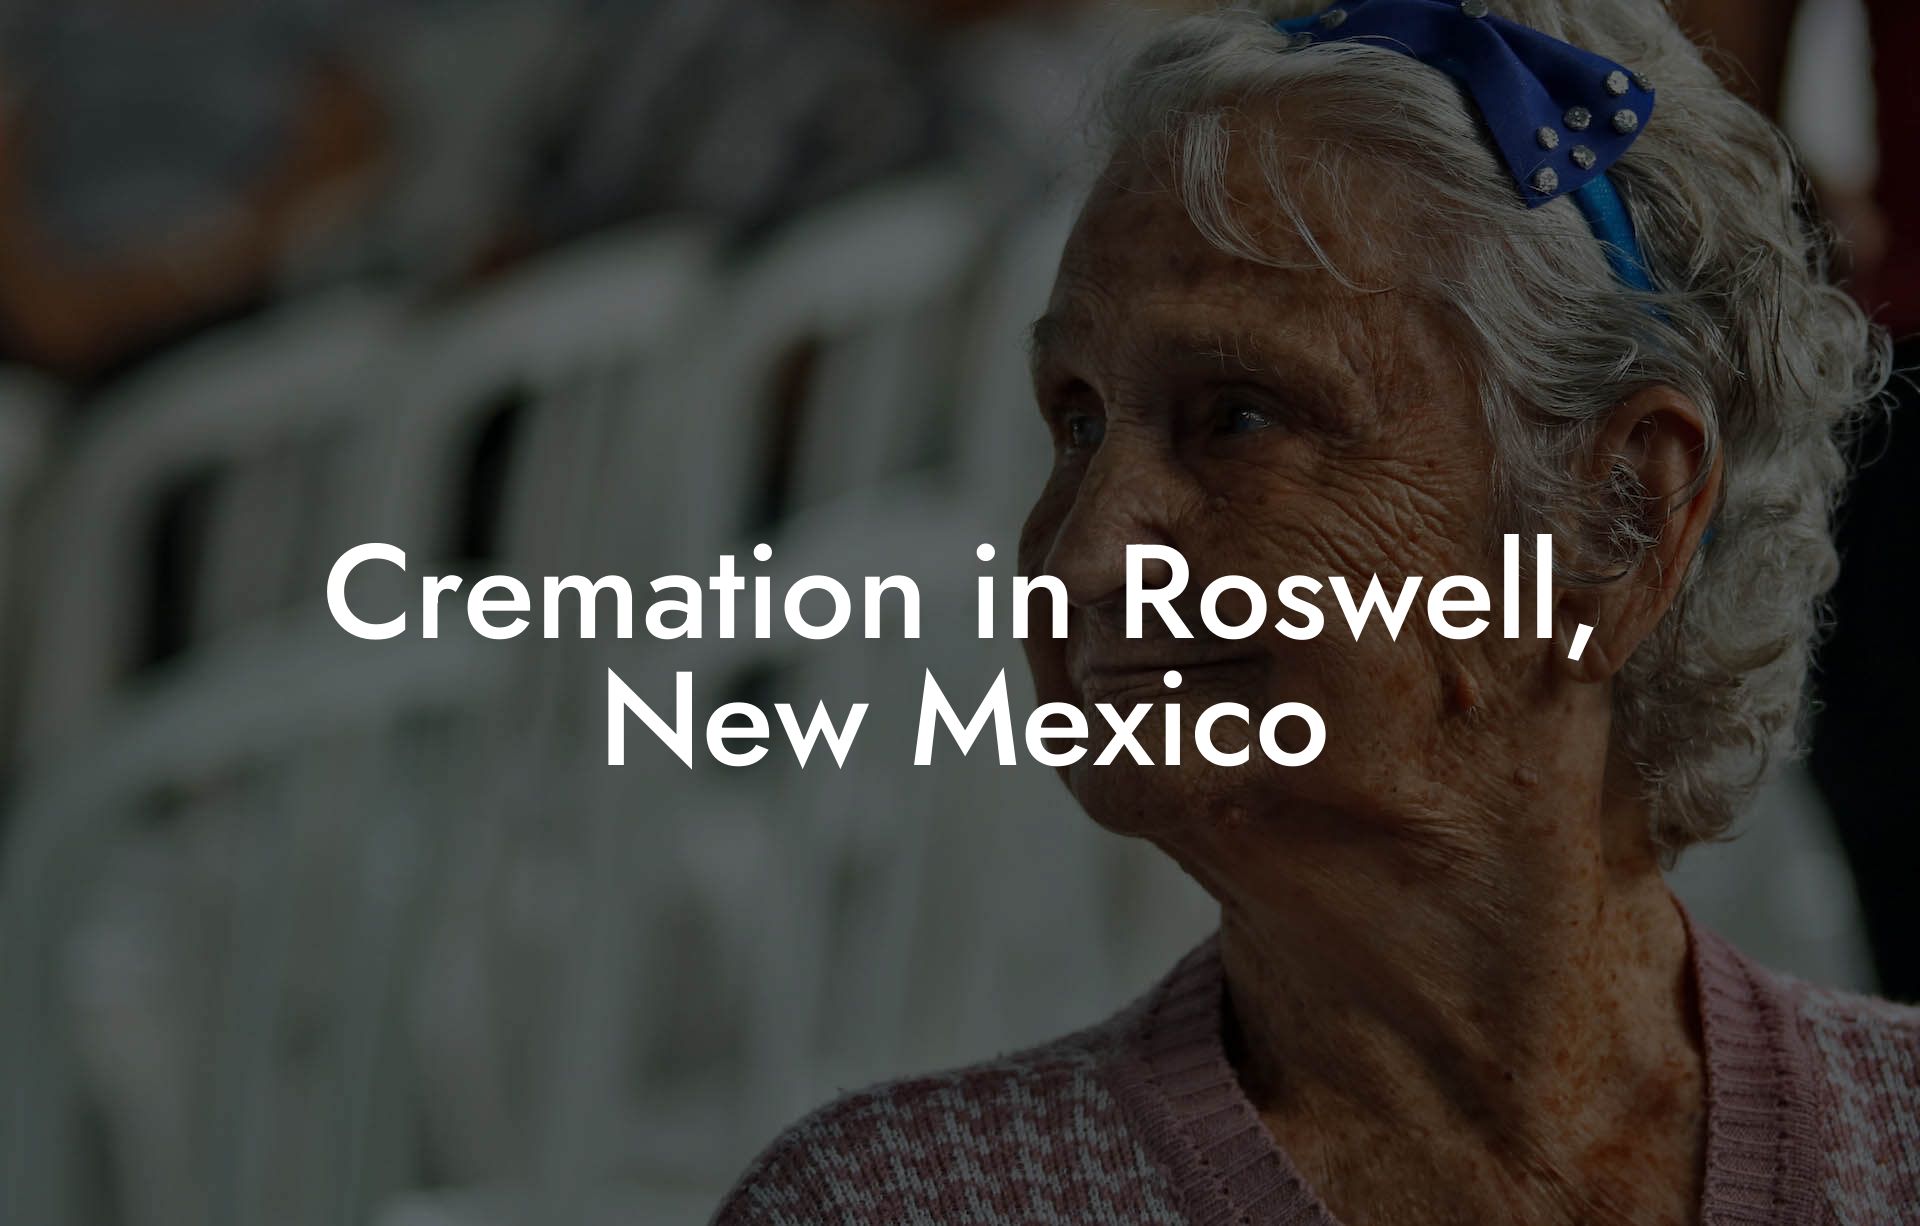 Cremation in Roswell, New Mexico